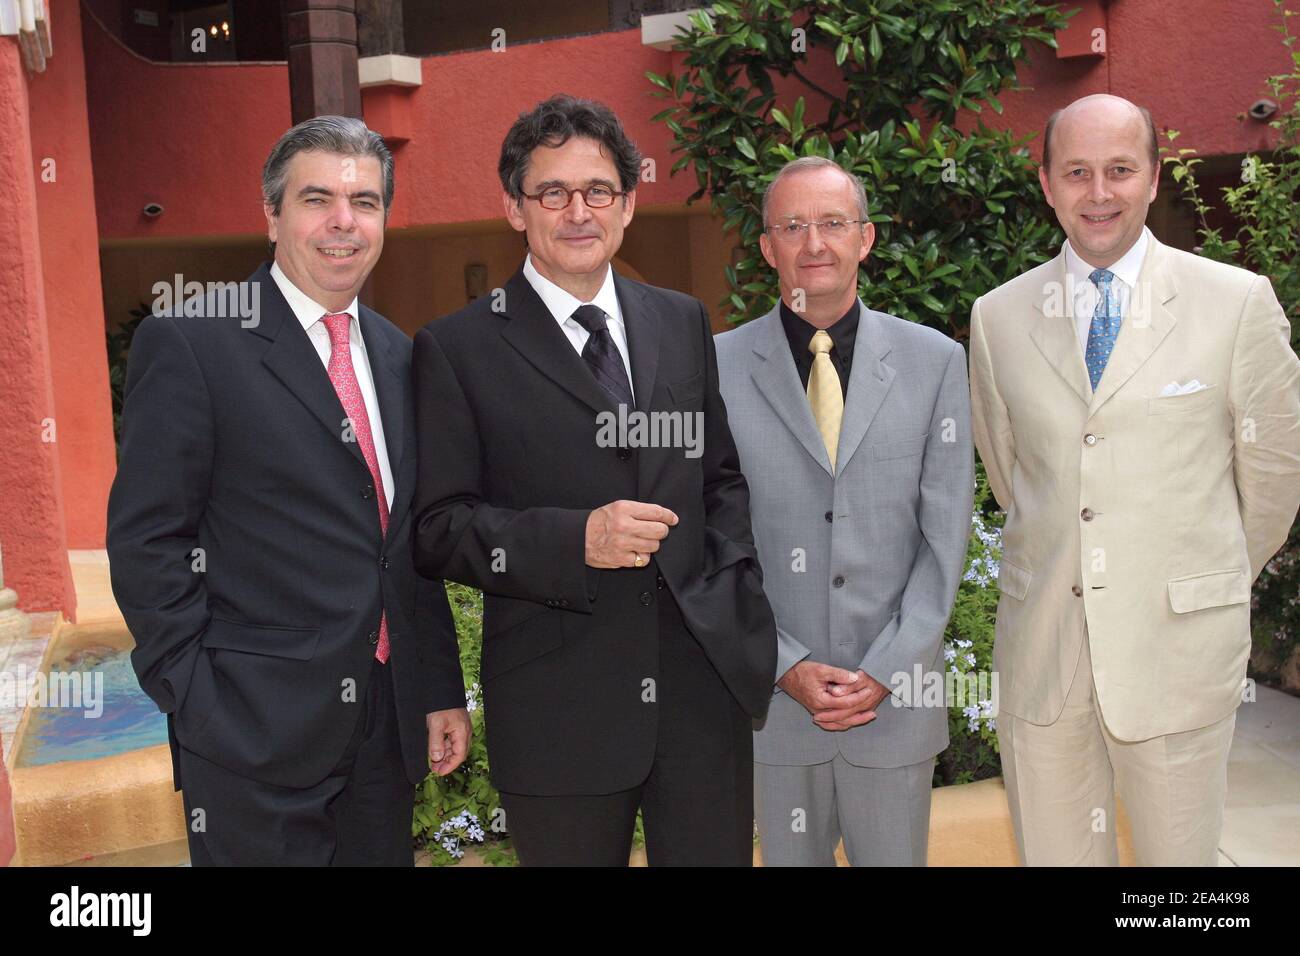 (L to R) French doctors specialists on Alzheimer disease, Bruno Dubois, Olivier de Ladoucette, Andre Delacourte, Jacques Touchon during a charity diner organized by Marisa Pavan (Jean-Pierre Aumont's ex wife) for URMA (Alzheimer research) at the hotel 'Byblos' in Saint-Tropez, France on July 13, 2005. Photo by Benoit Pinguet/ABACAPRESS.COM Stock Photo